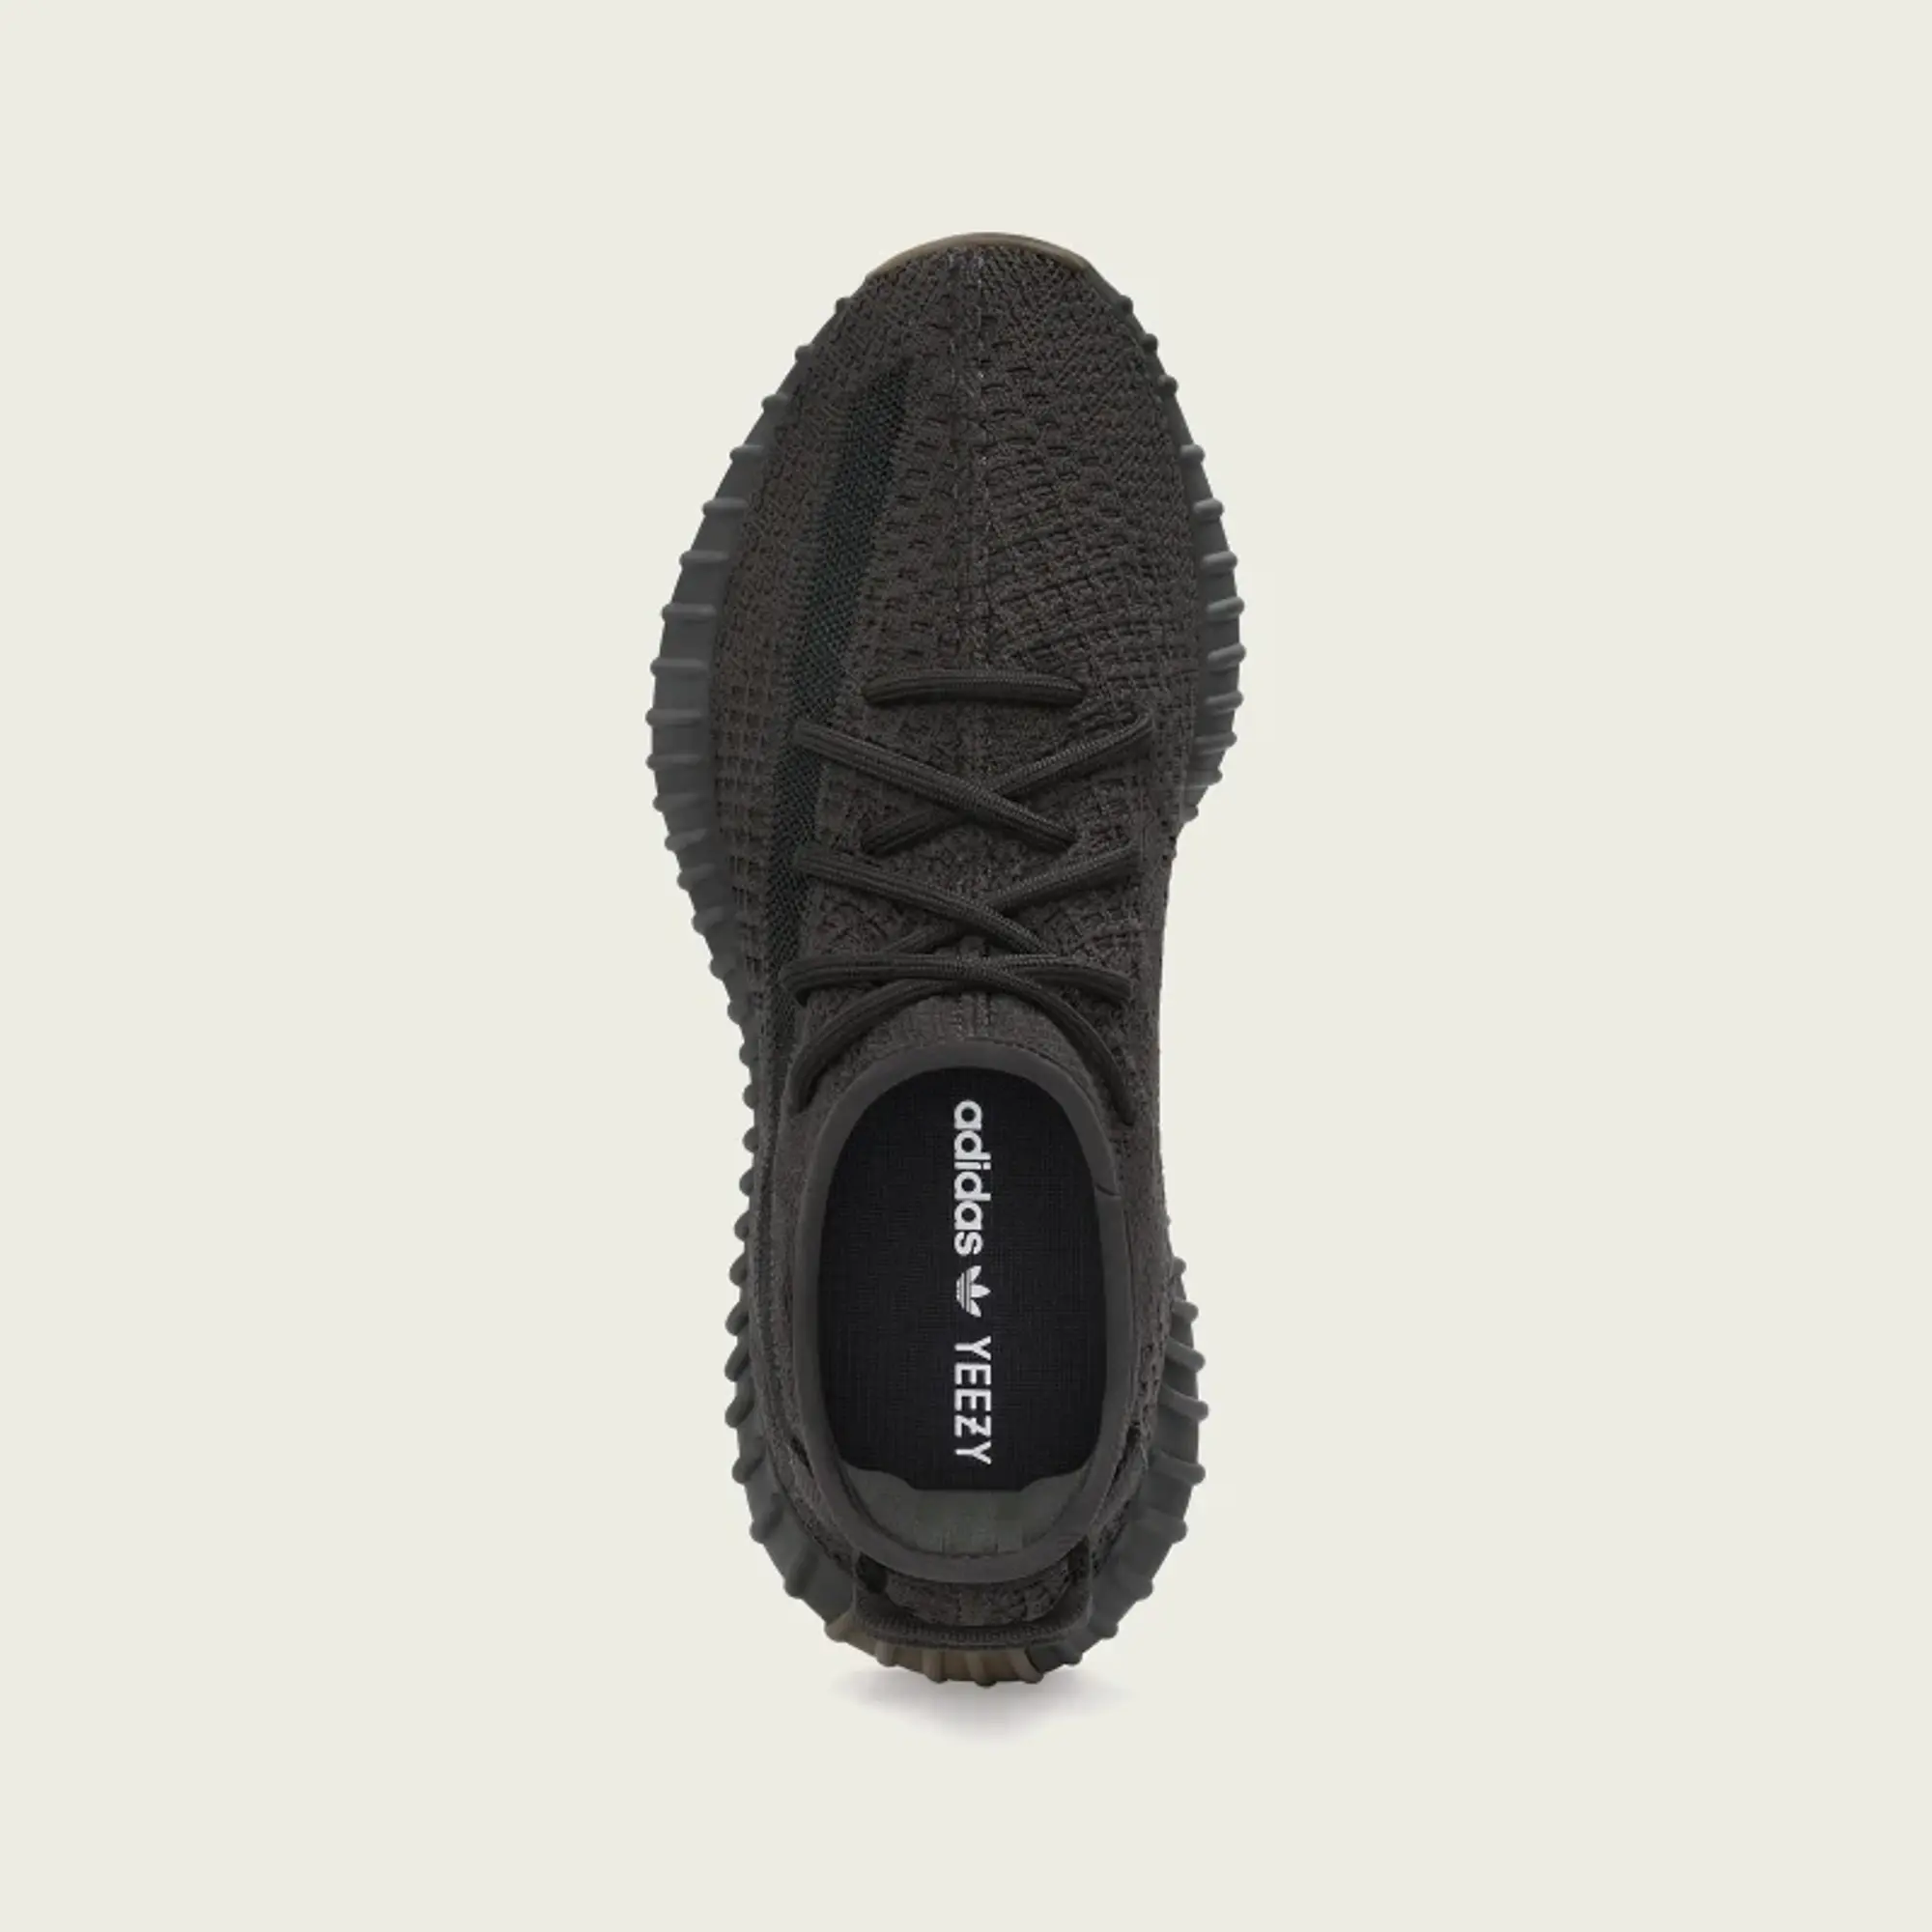 adidas Yeezy Boost 350 V2 Cinder Shoes